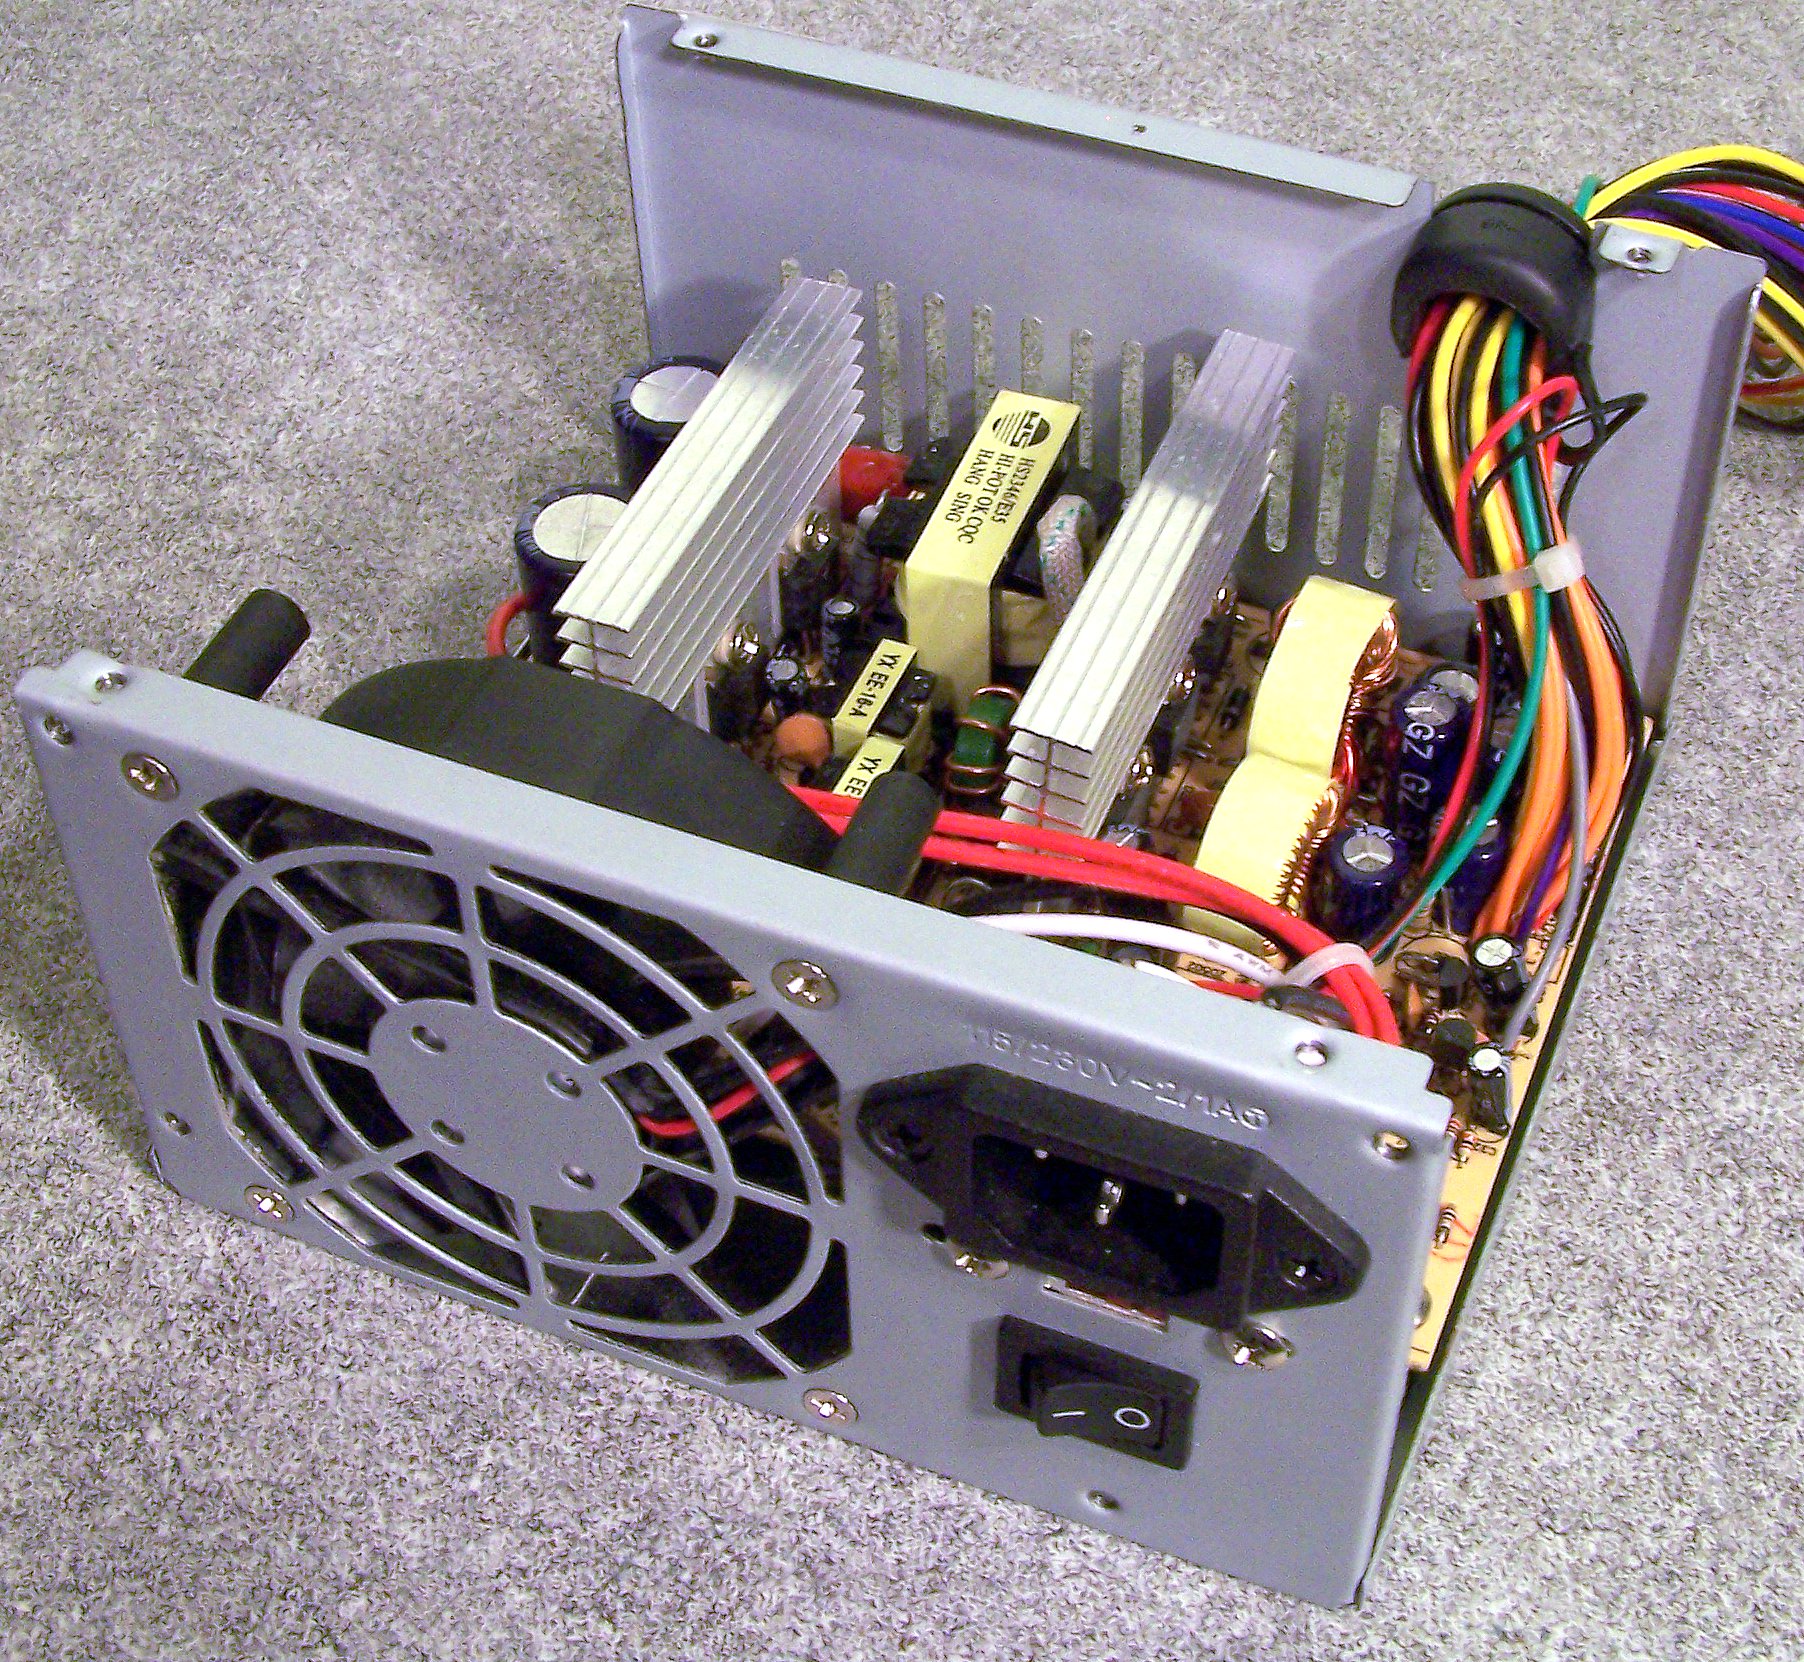 Computer hardware components or a power supply unit